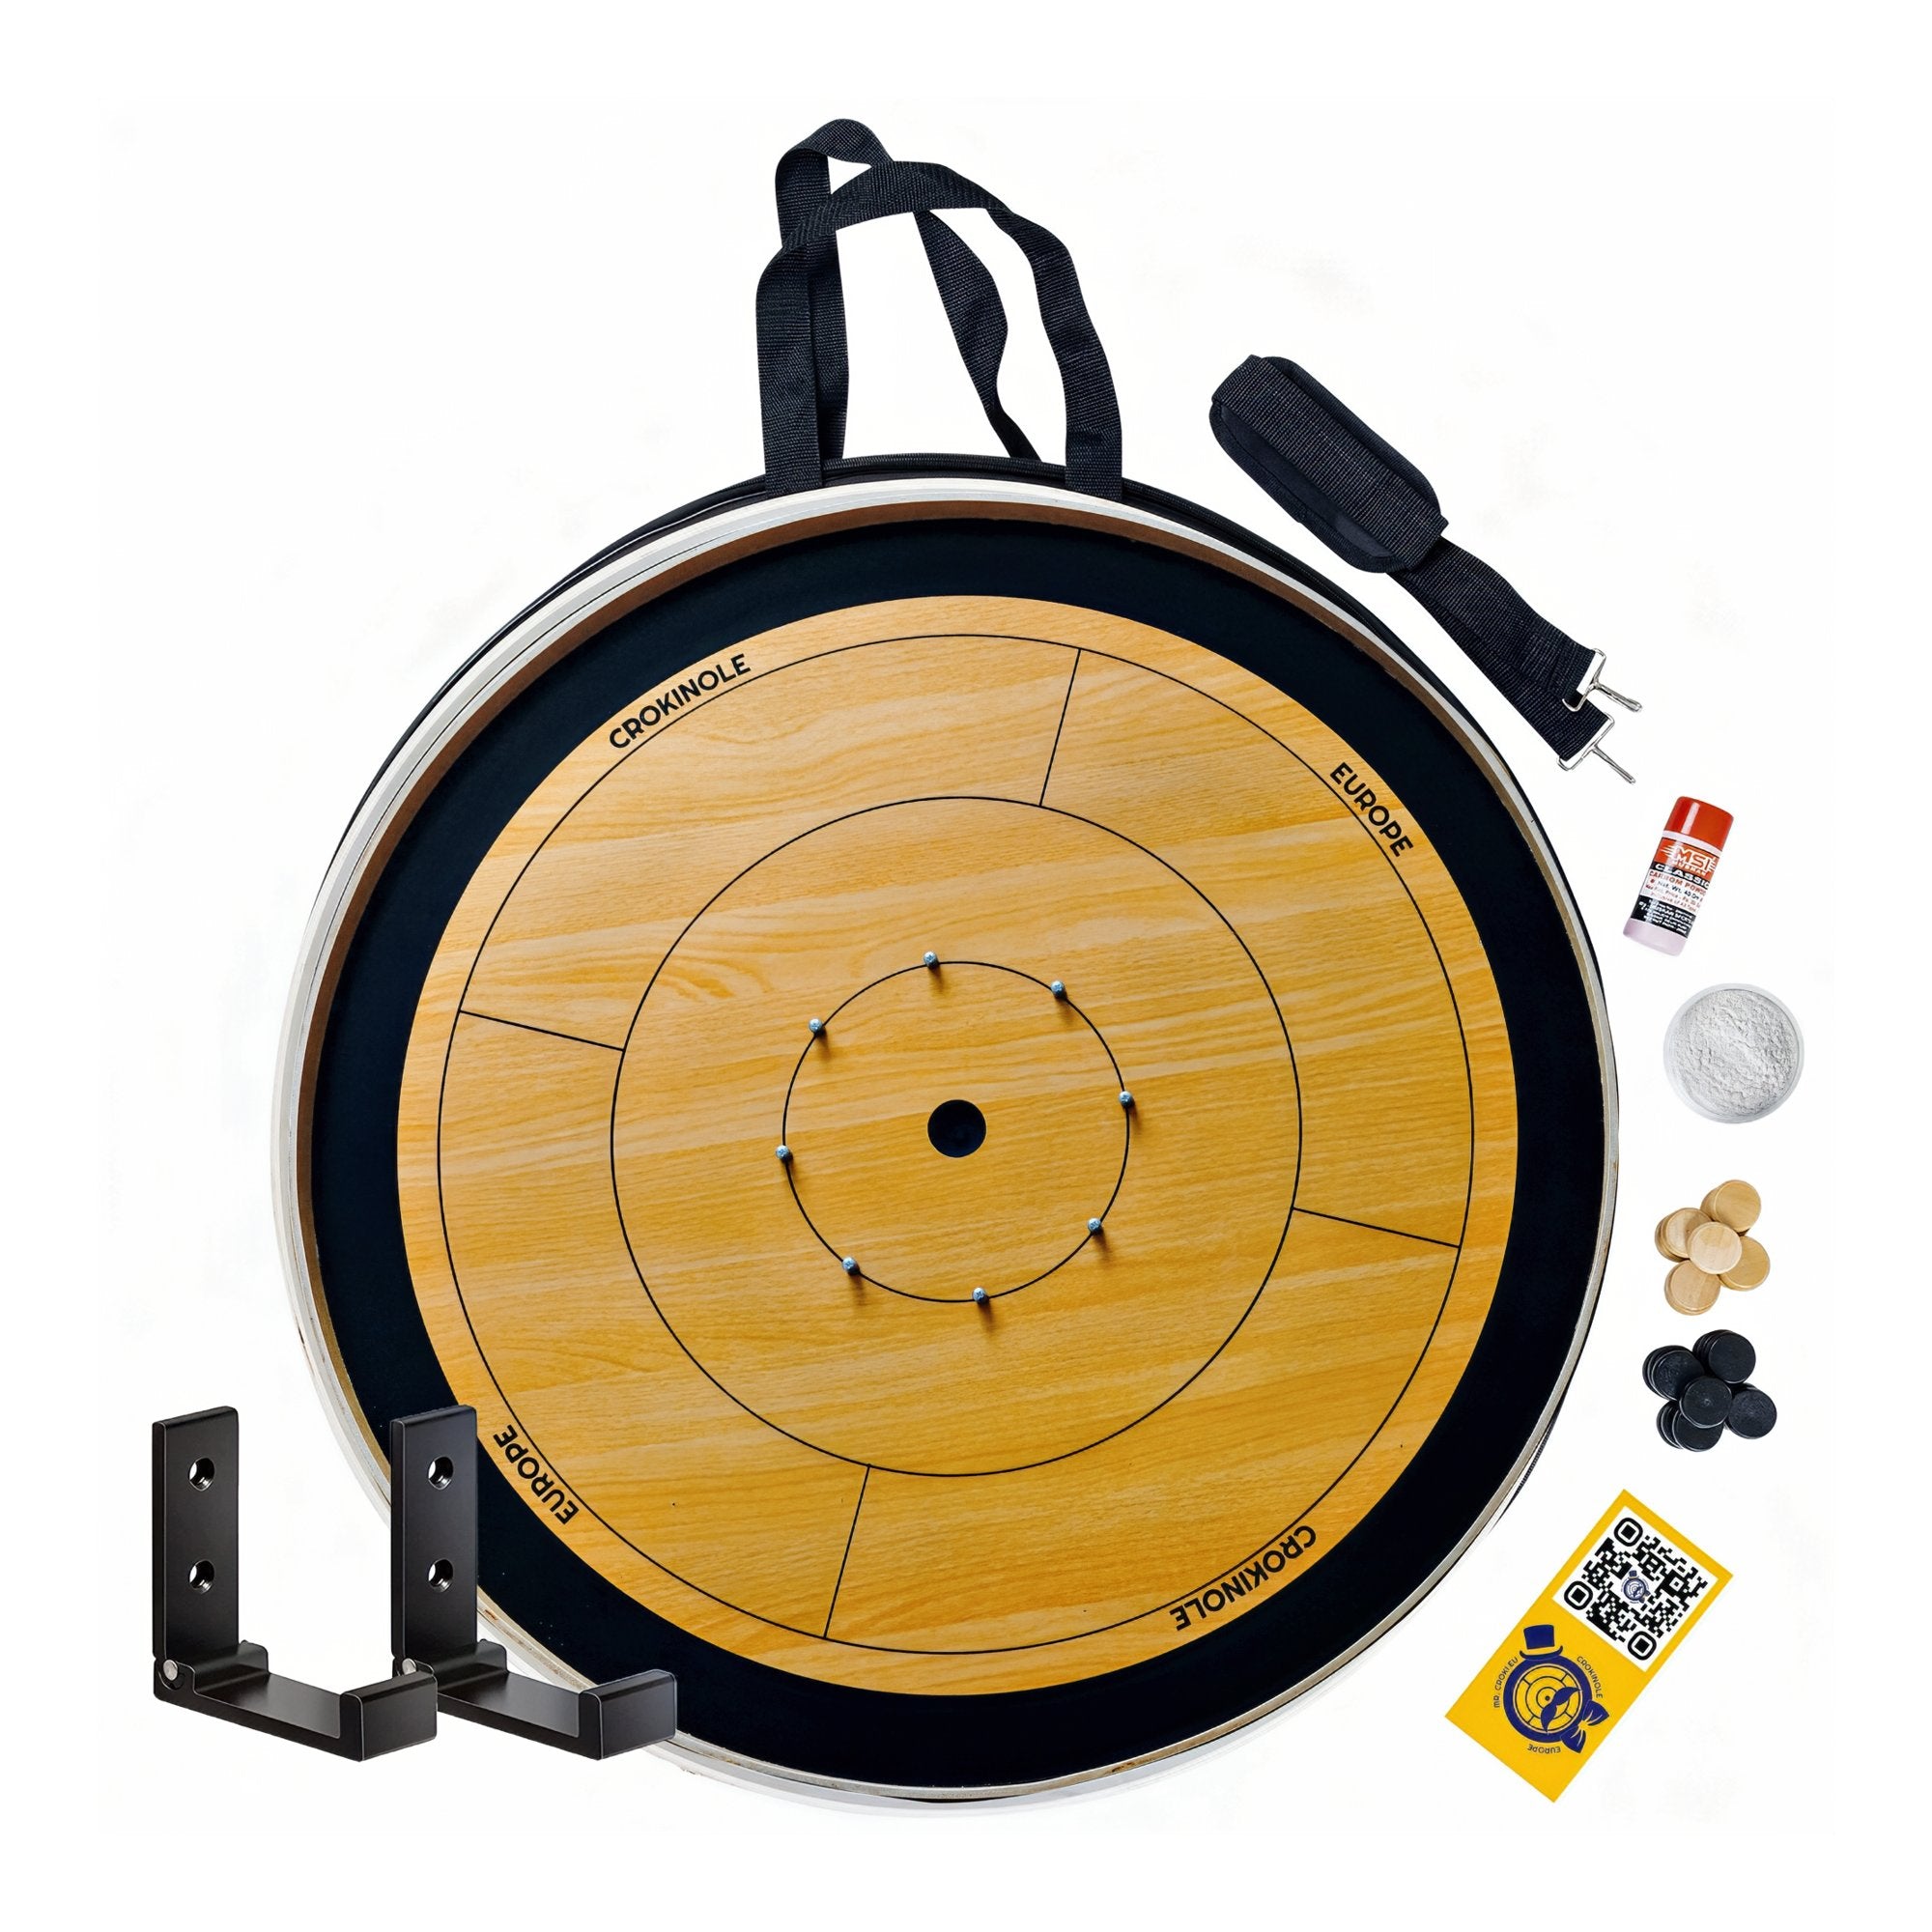 Crokinole Board Game - Tournament Board + 26 Discs + Carrom Powder - Official Dimensions - Strategic Game for Young and Old - Buy Crokinole - Crokinole Europe